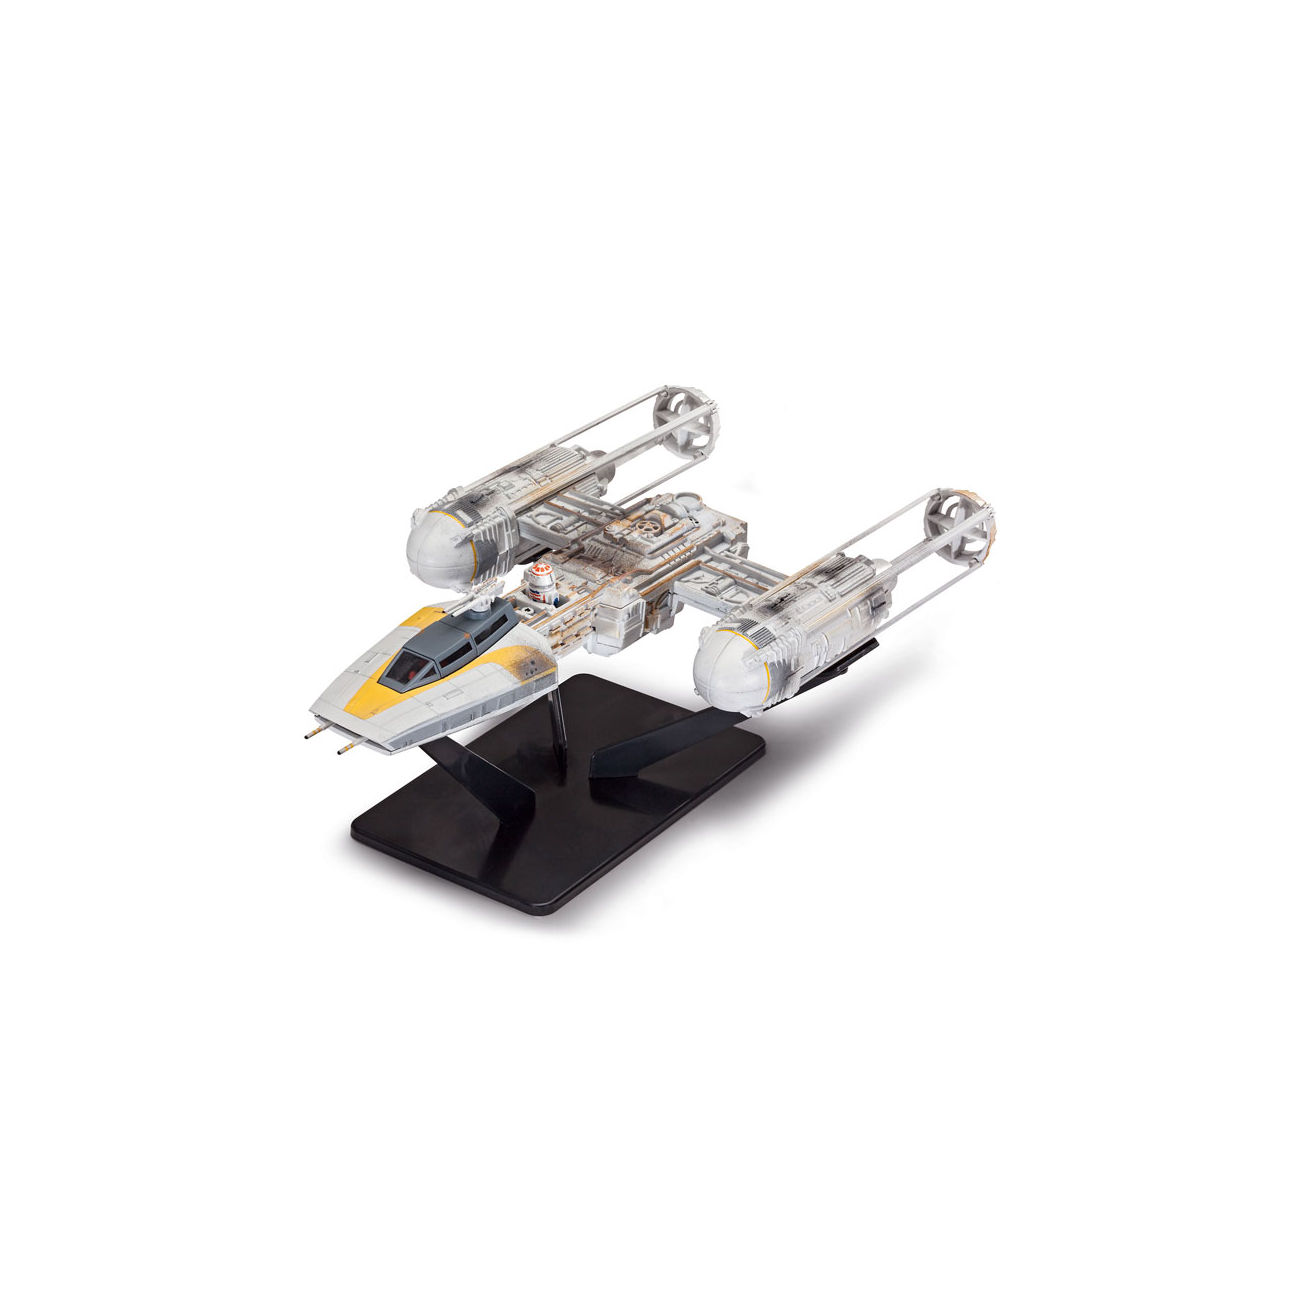 Revell Level 2 Star Wars Rogue One Y-Wing Fighter 1:72 06699